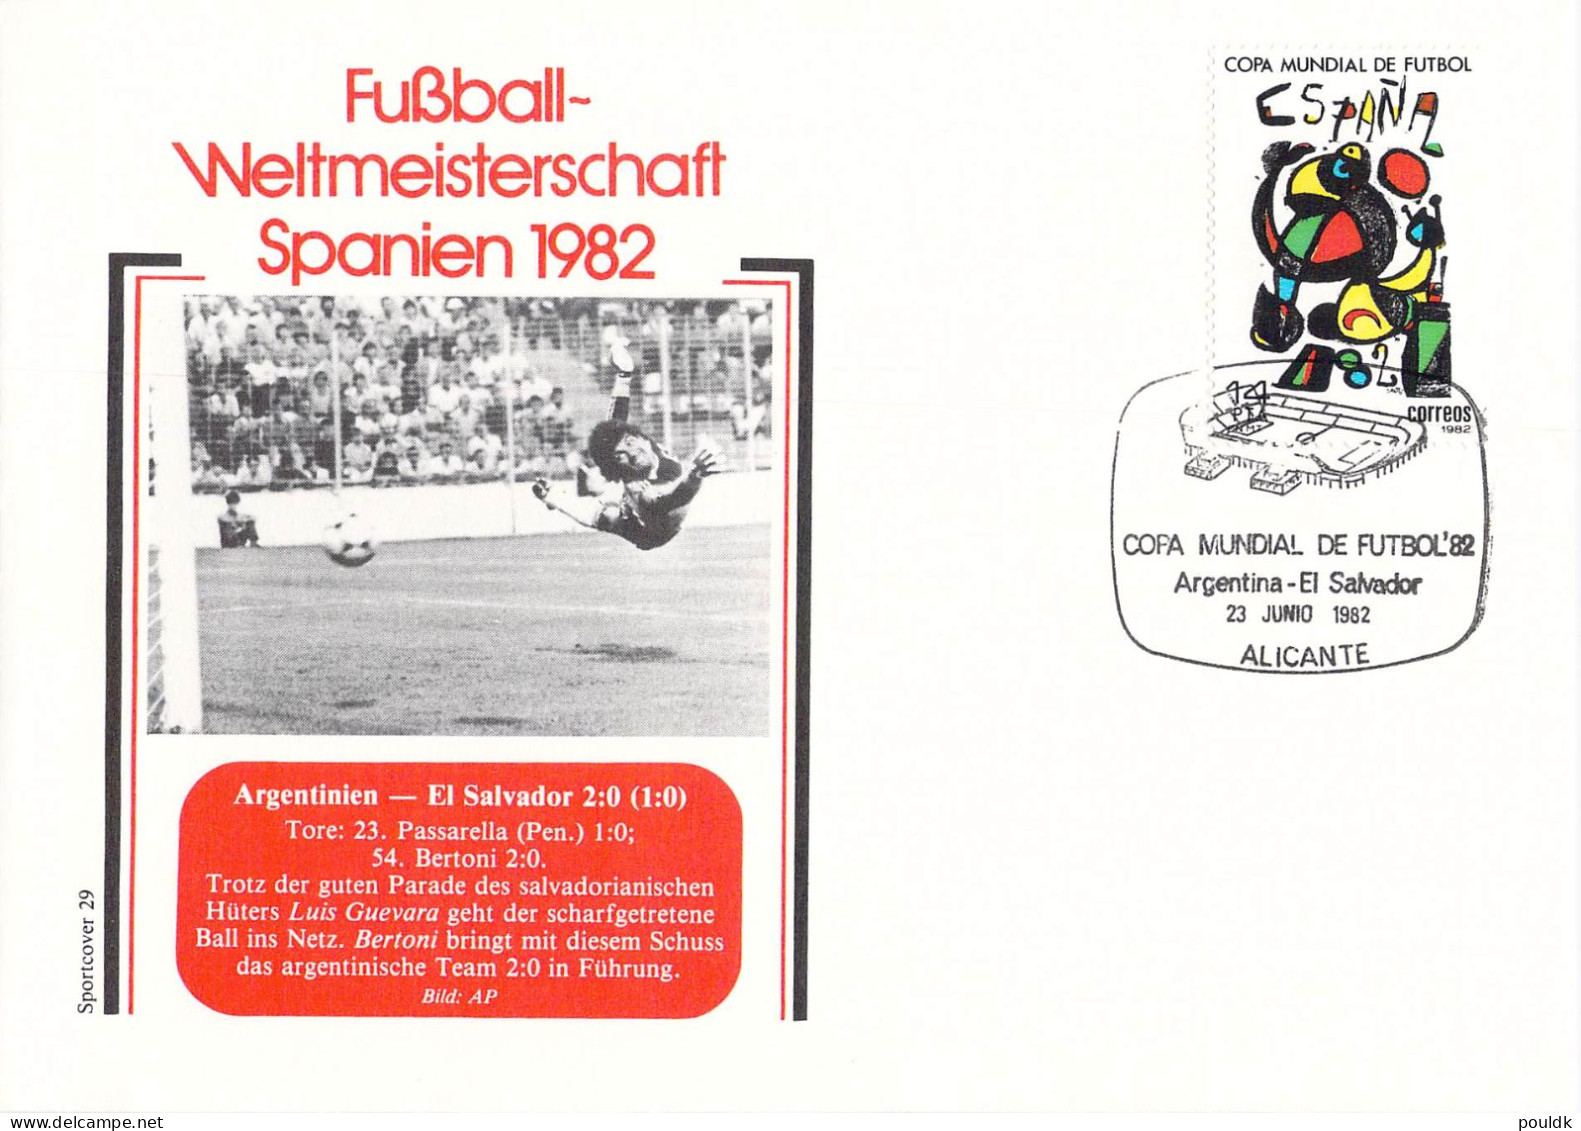 FIFA World Cup in Football in Spain 1982 - 14 covers. Postal weight approx 0,09 kg. Please read Sales Conditions under I